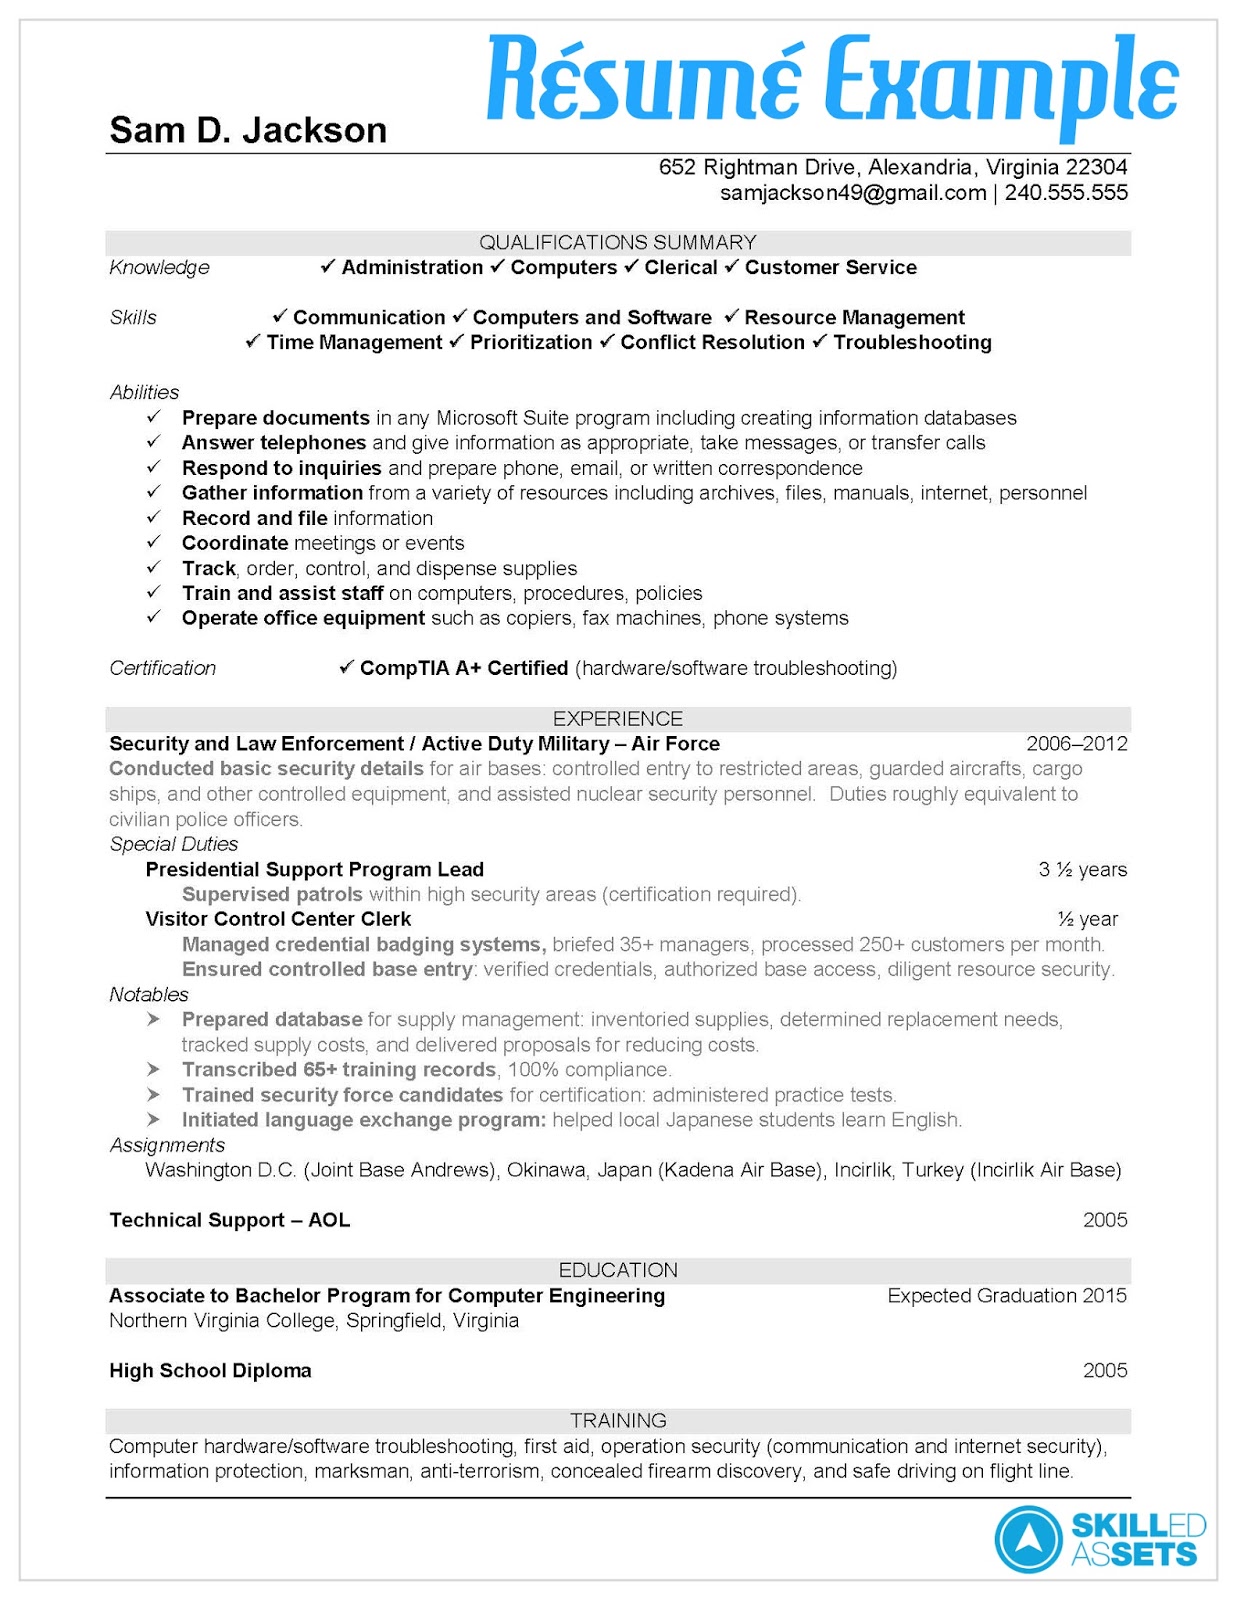 Check status resume submission